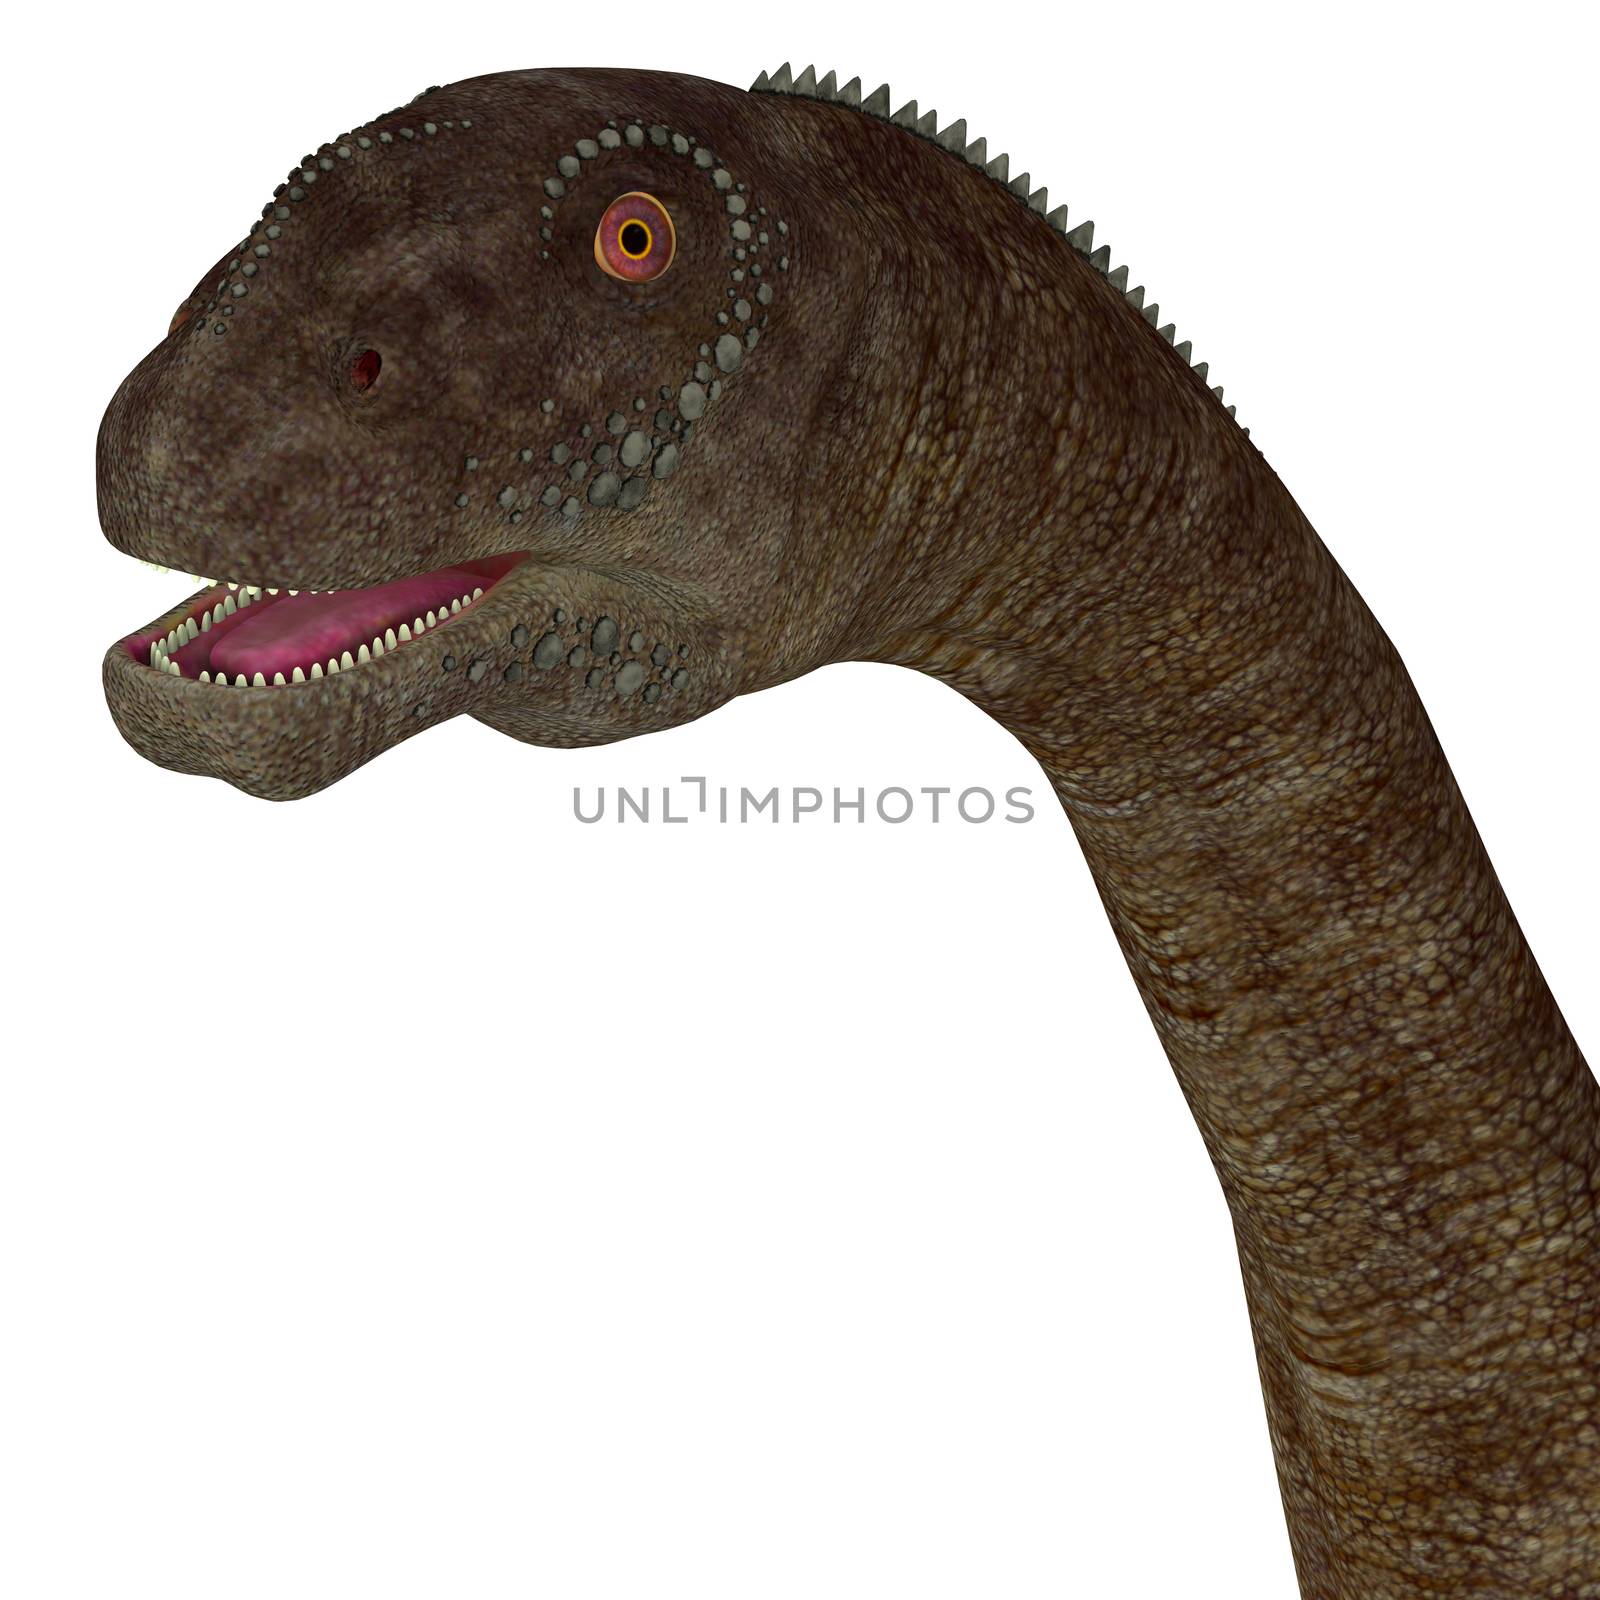 Malawisaurus was a herbivore sauropod dinosaur that lived in Africa during the Cretaceous Period.